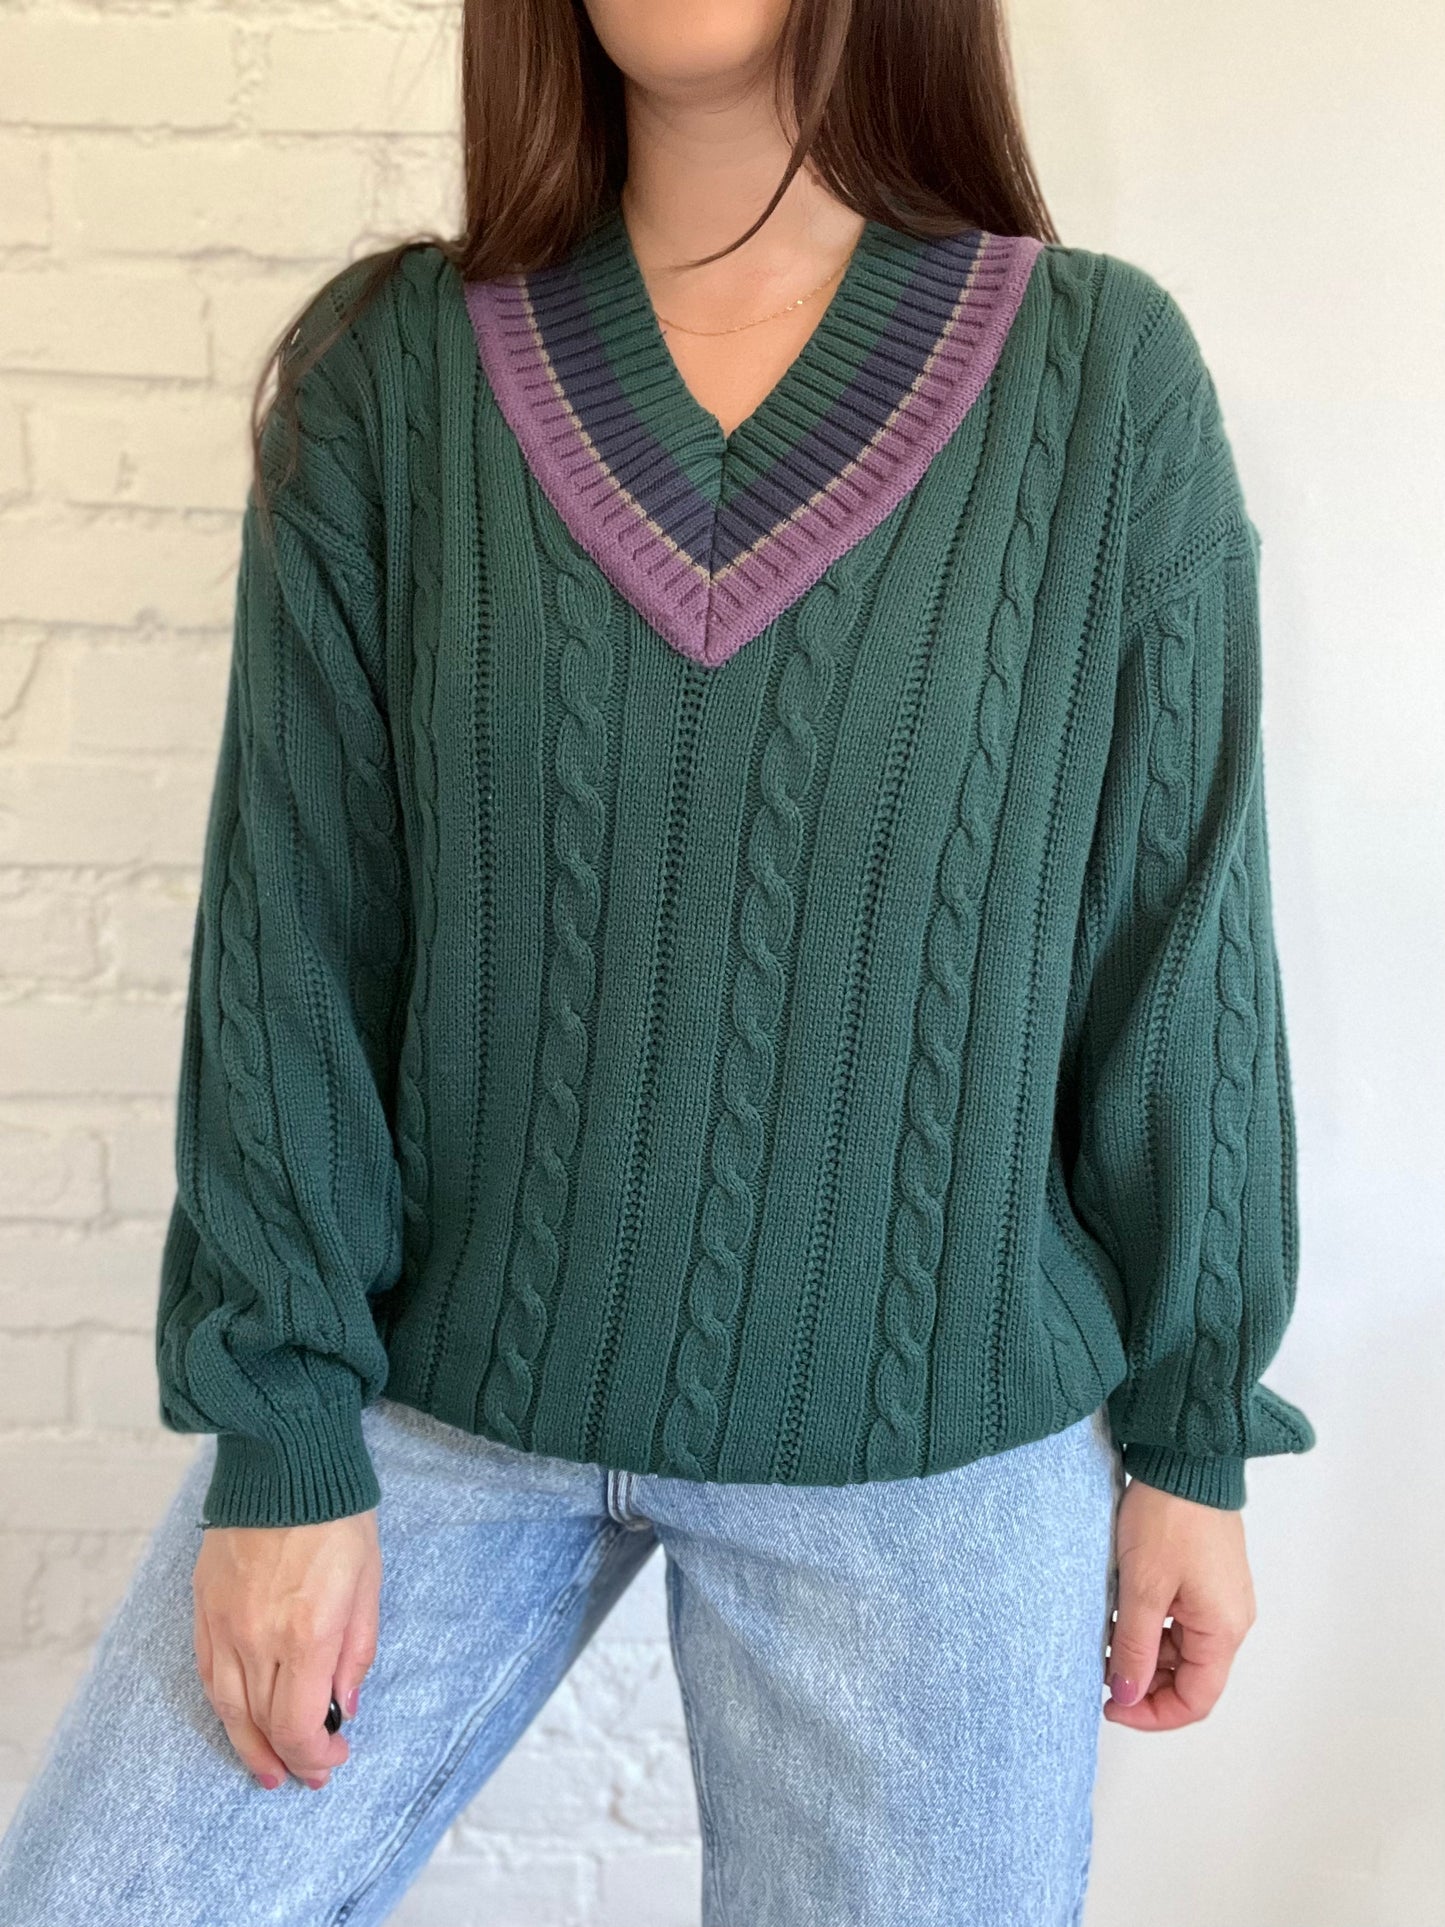 Hunter Green Tennis Cable Knit Sweater - L